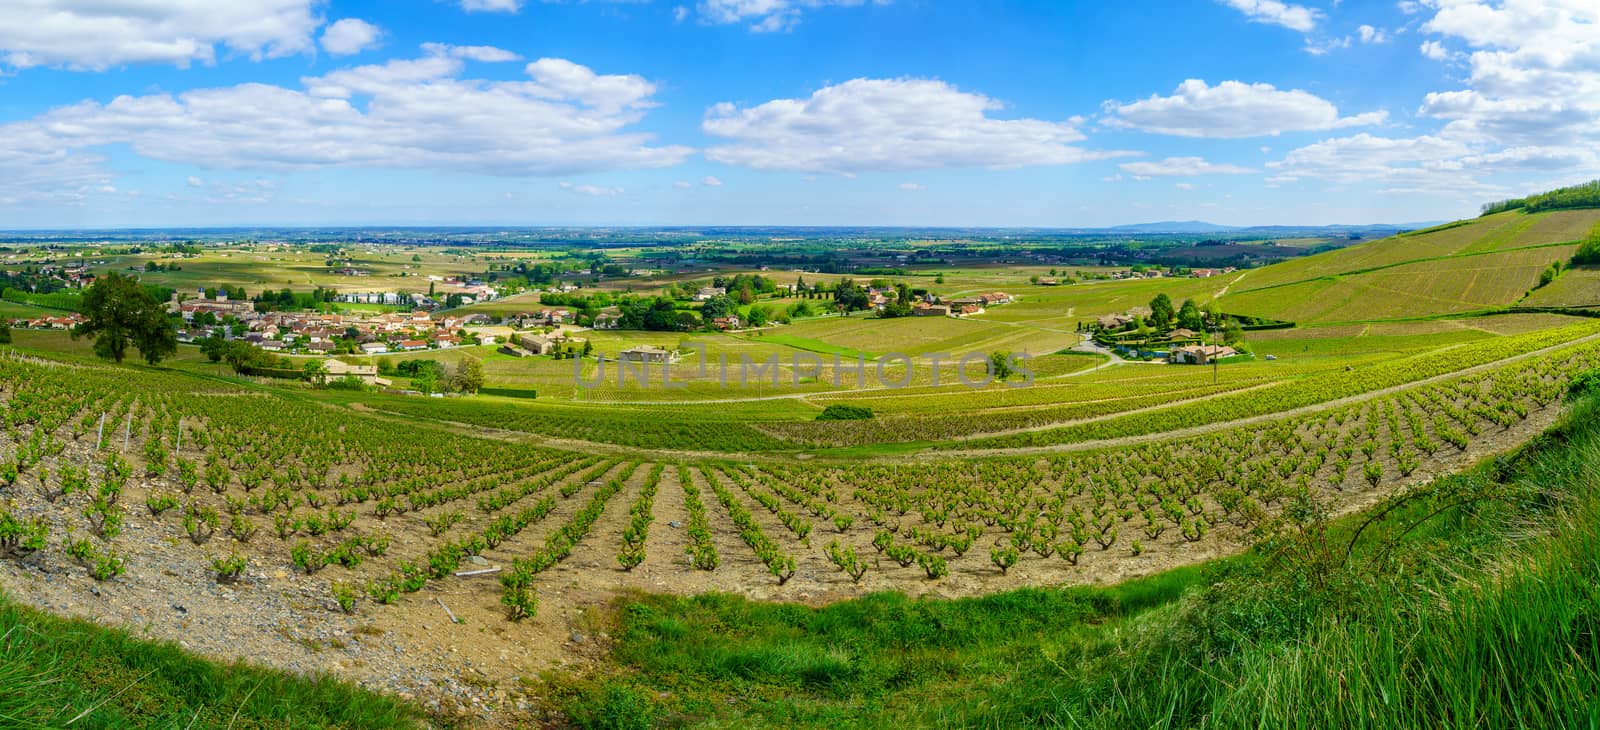 Panoramic landscape of vineyards and countryside in Beaujolais, Rhone department, France